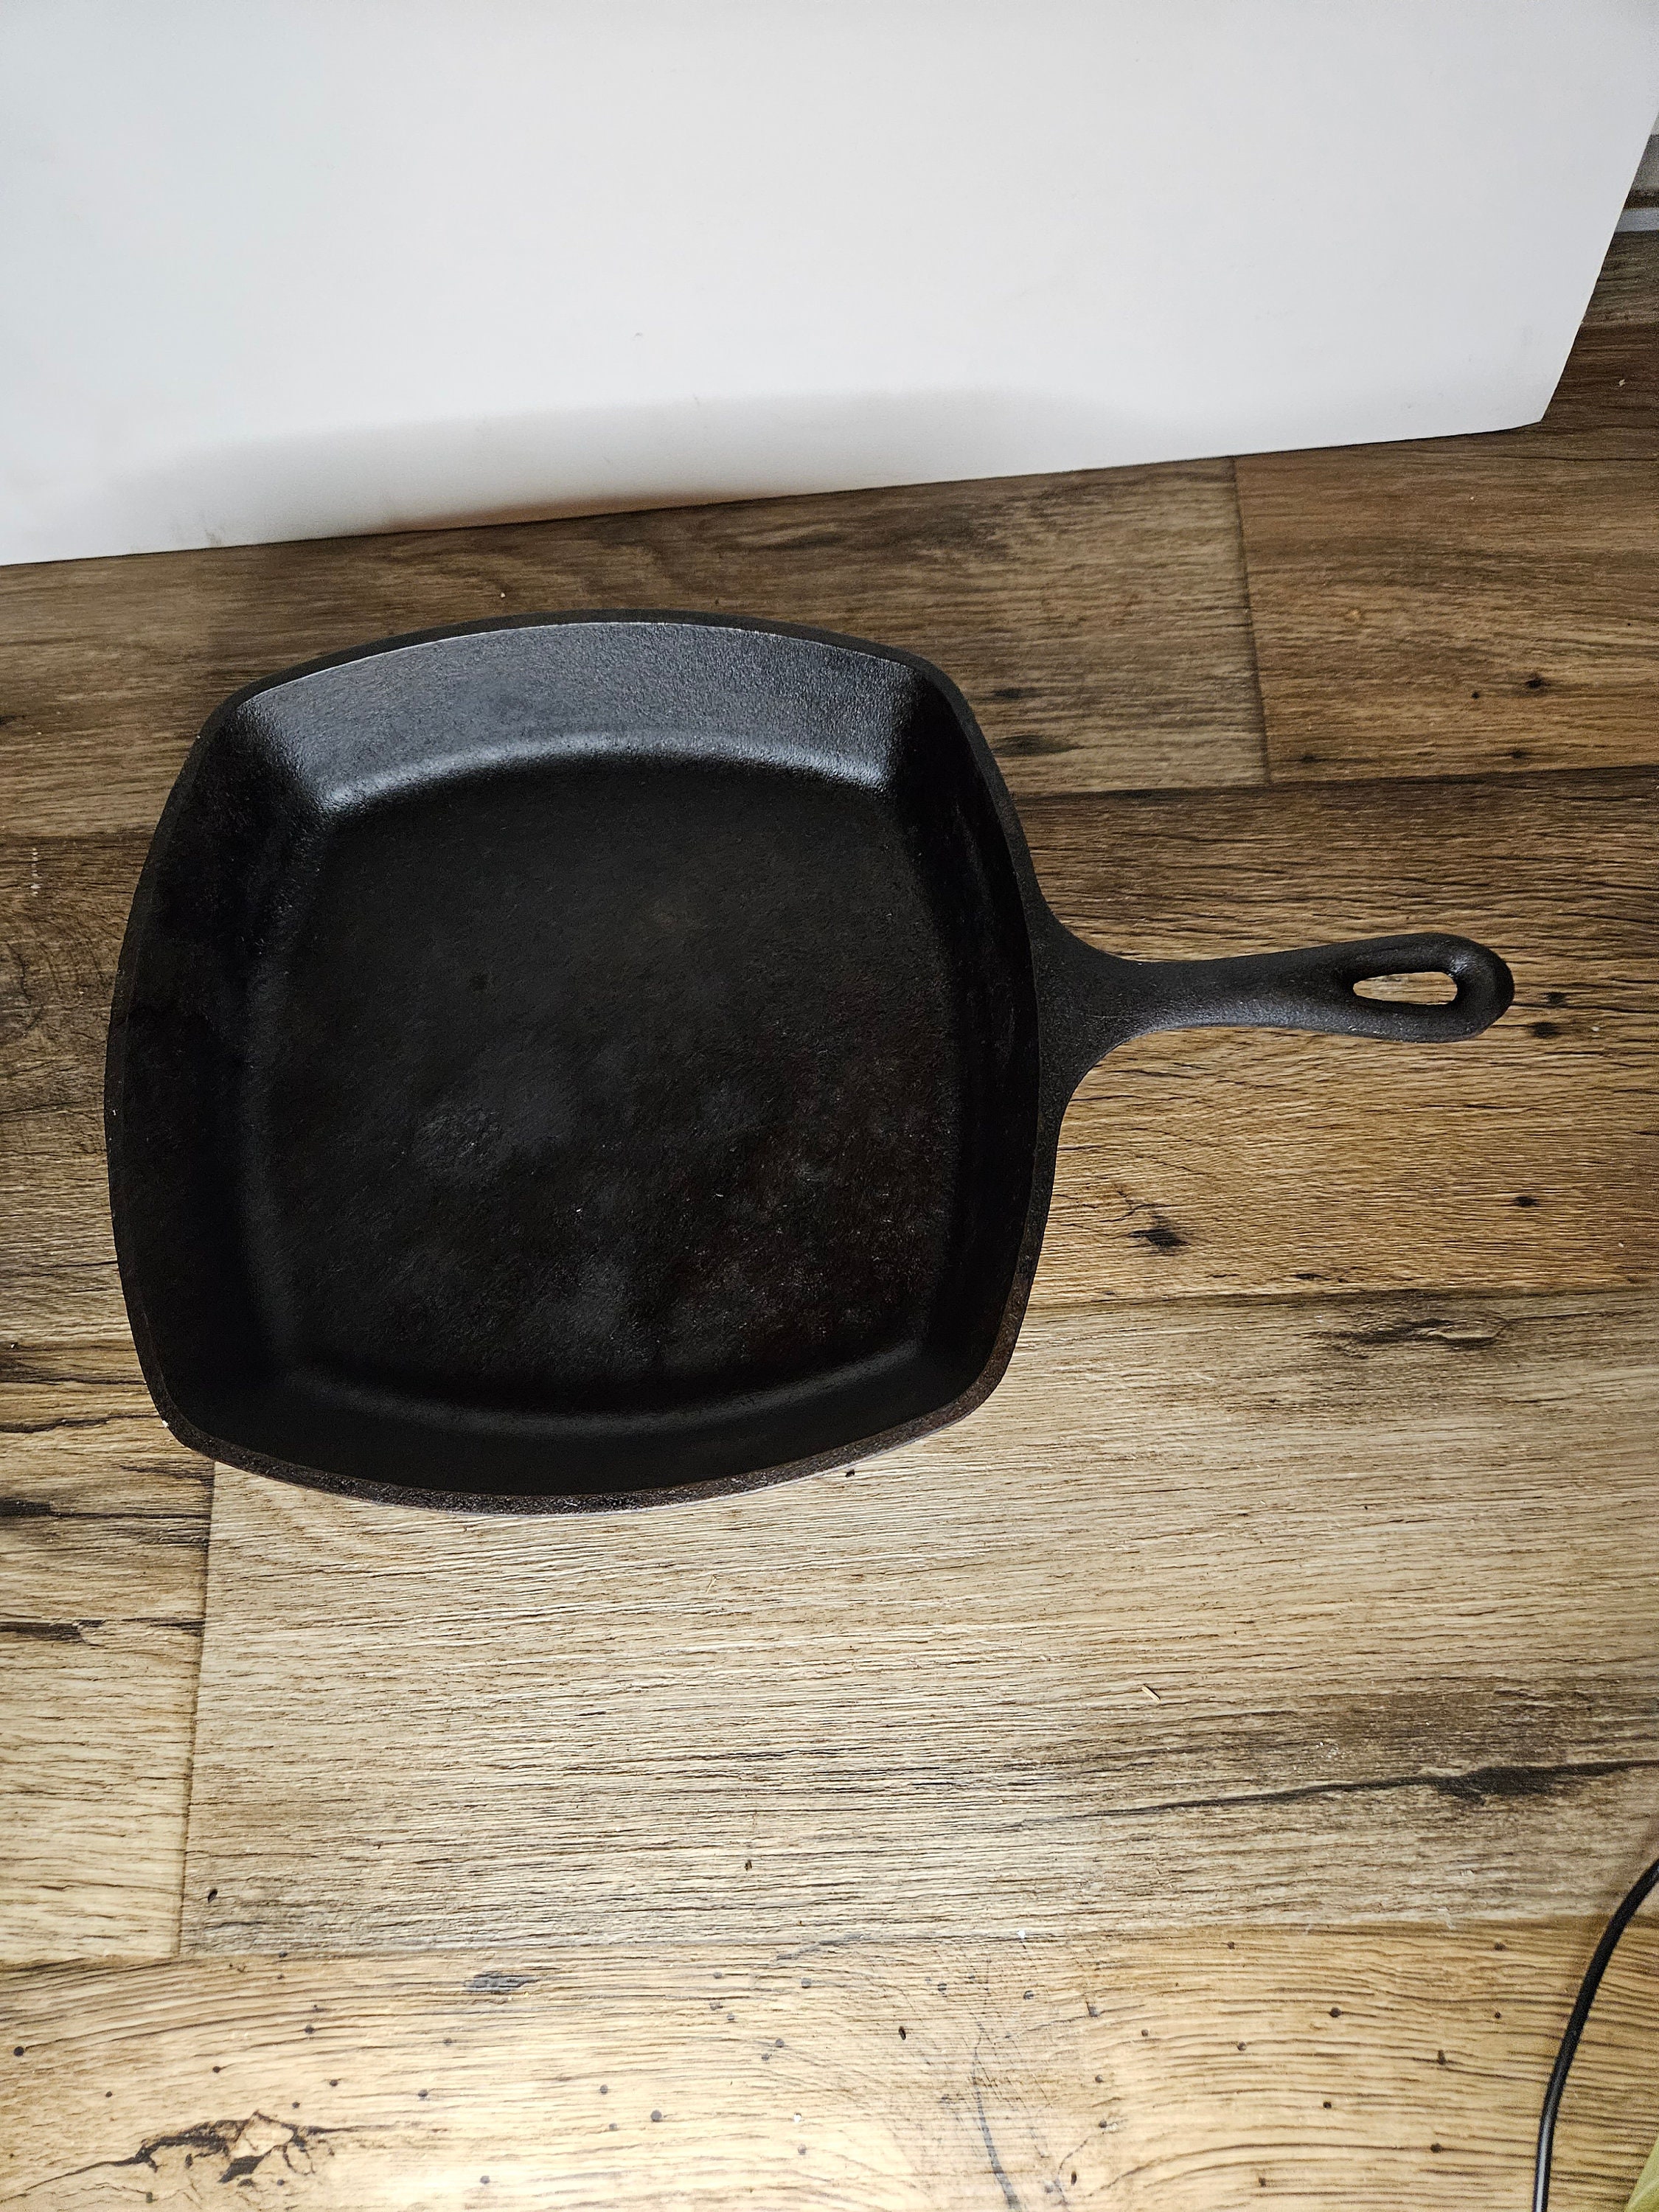 CLASSIC Square Fry Pan